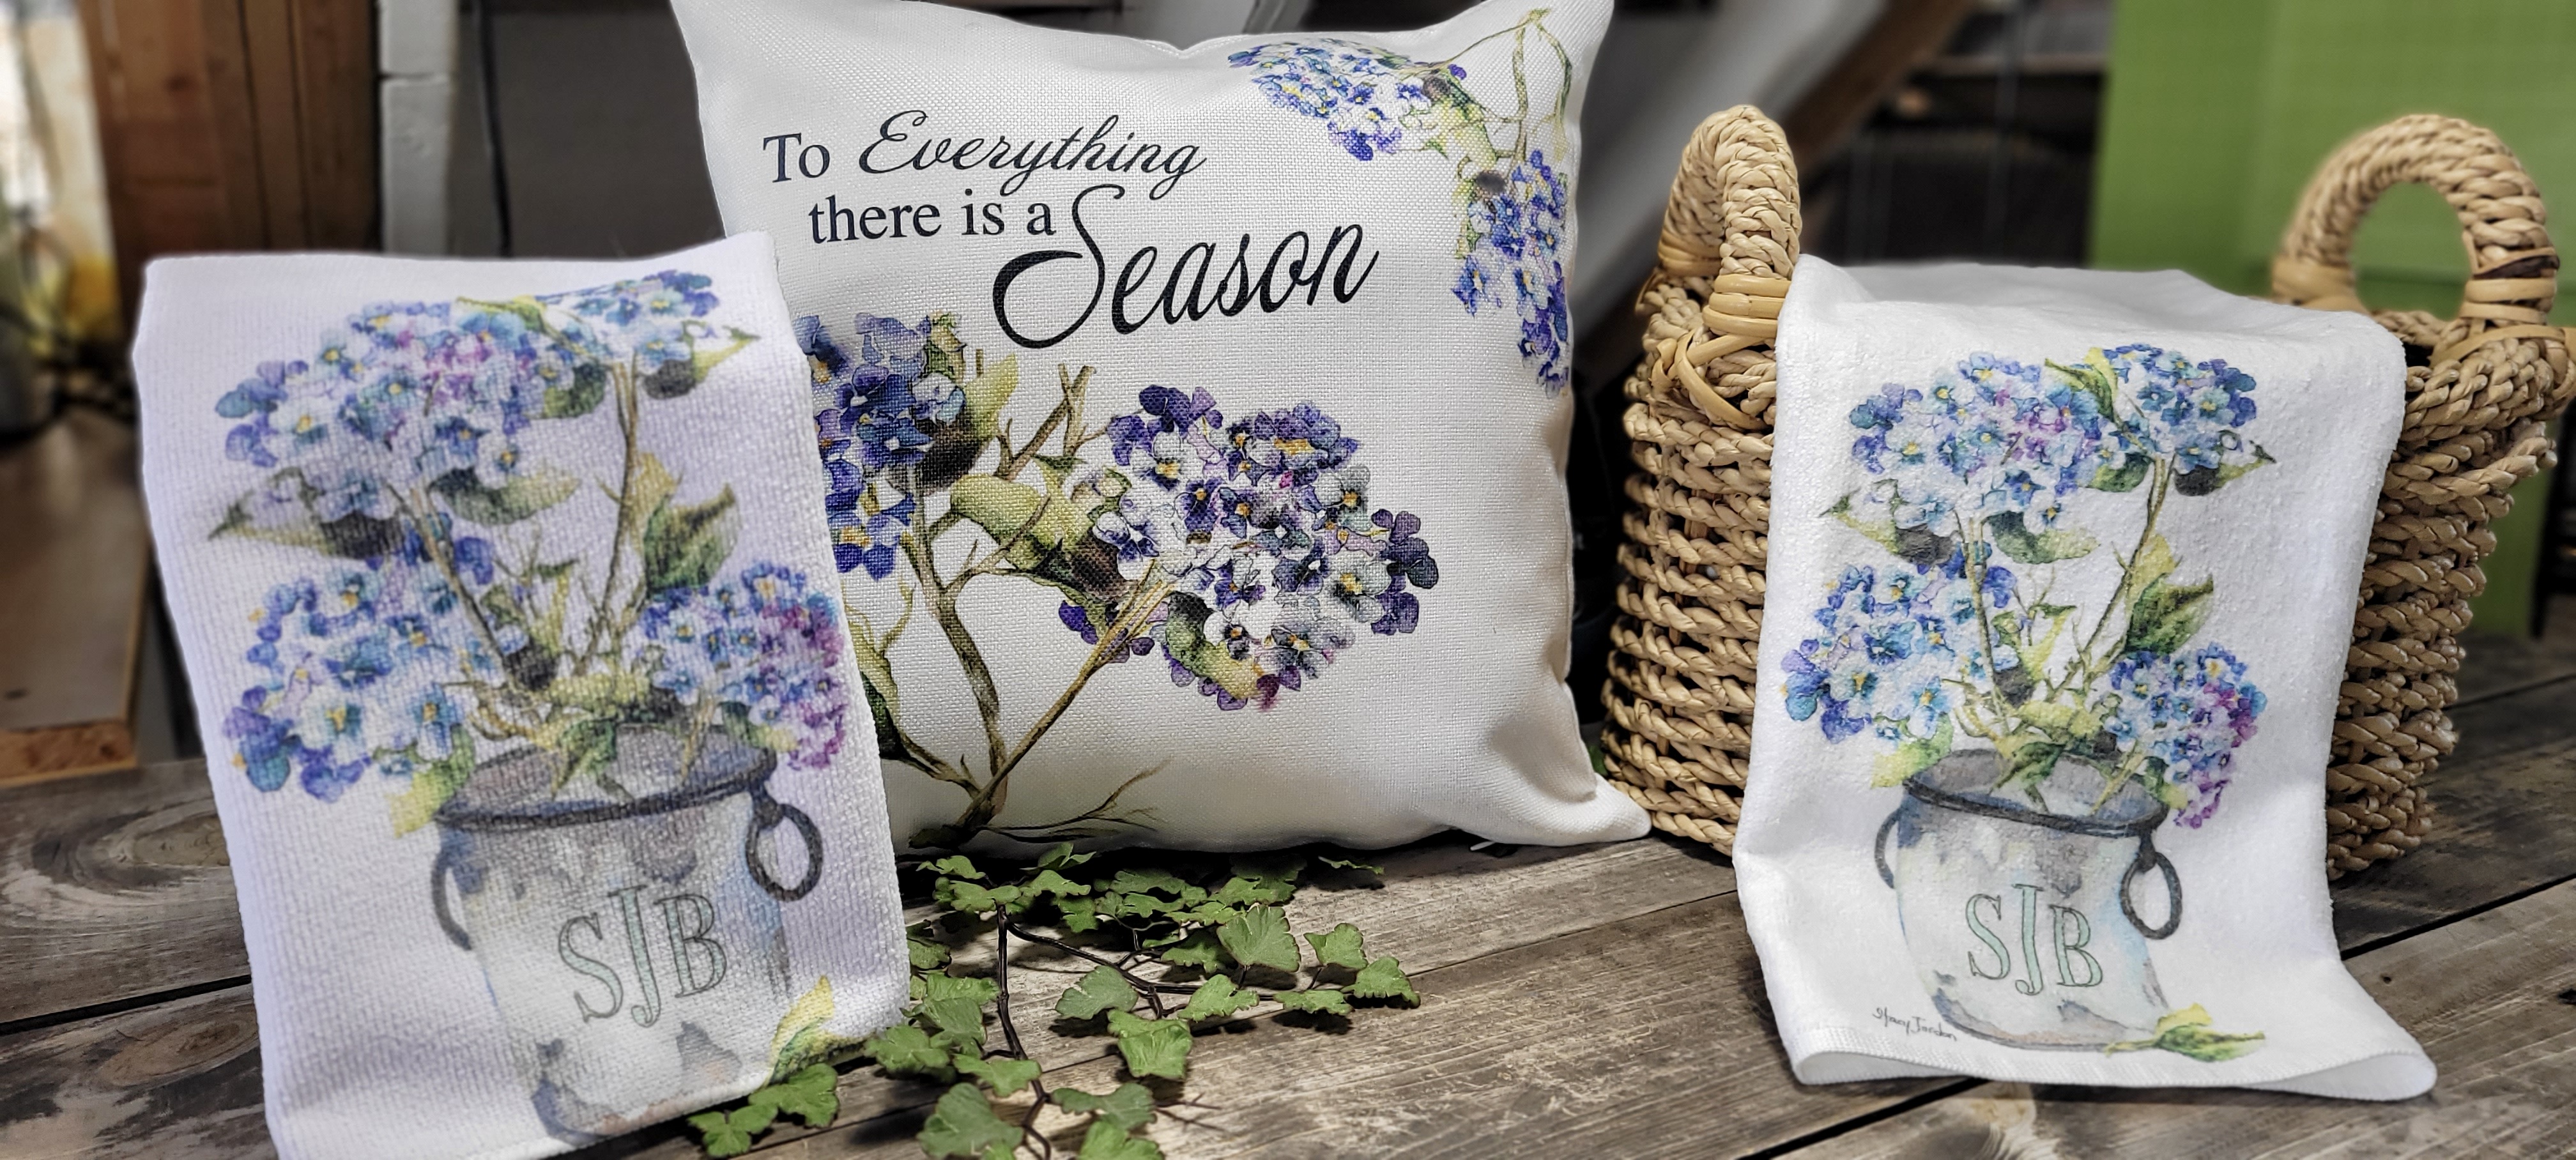 Blue Hydrangeas made with sublimation printing